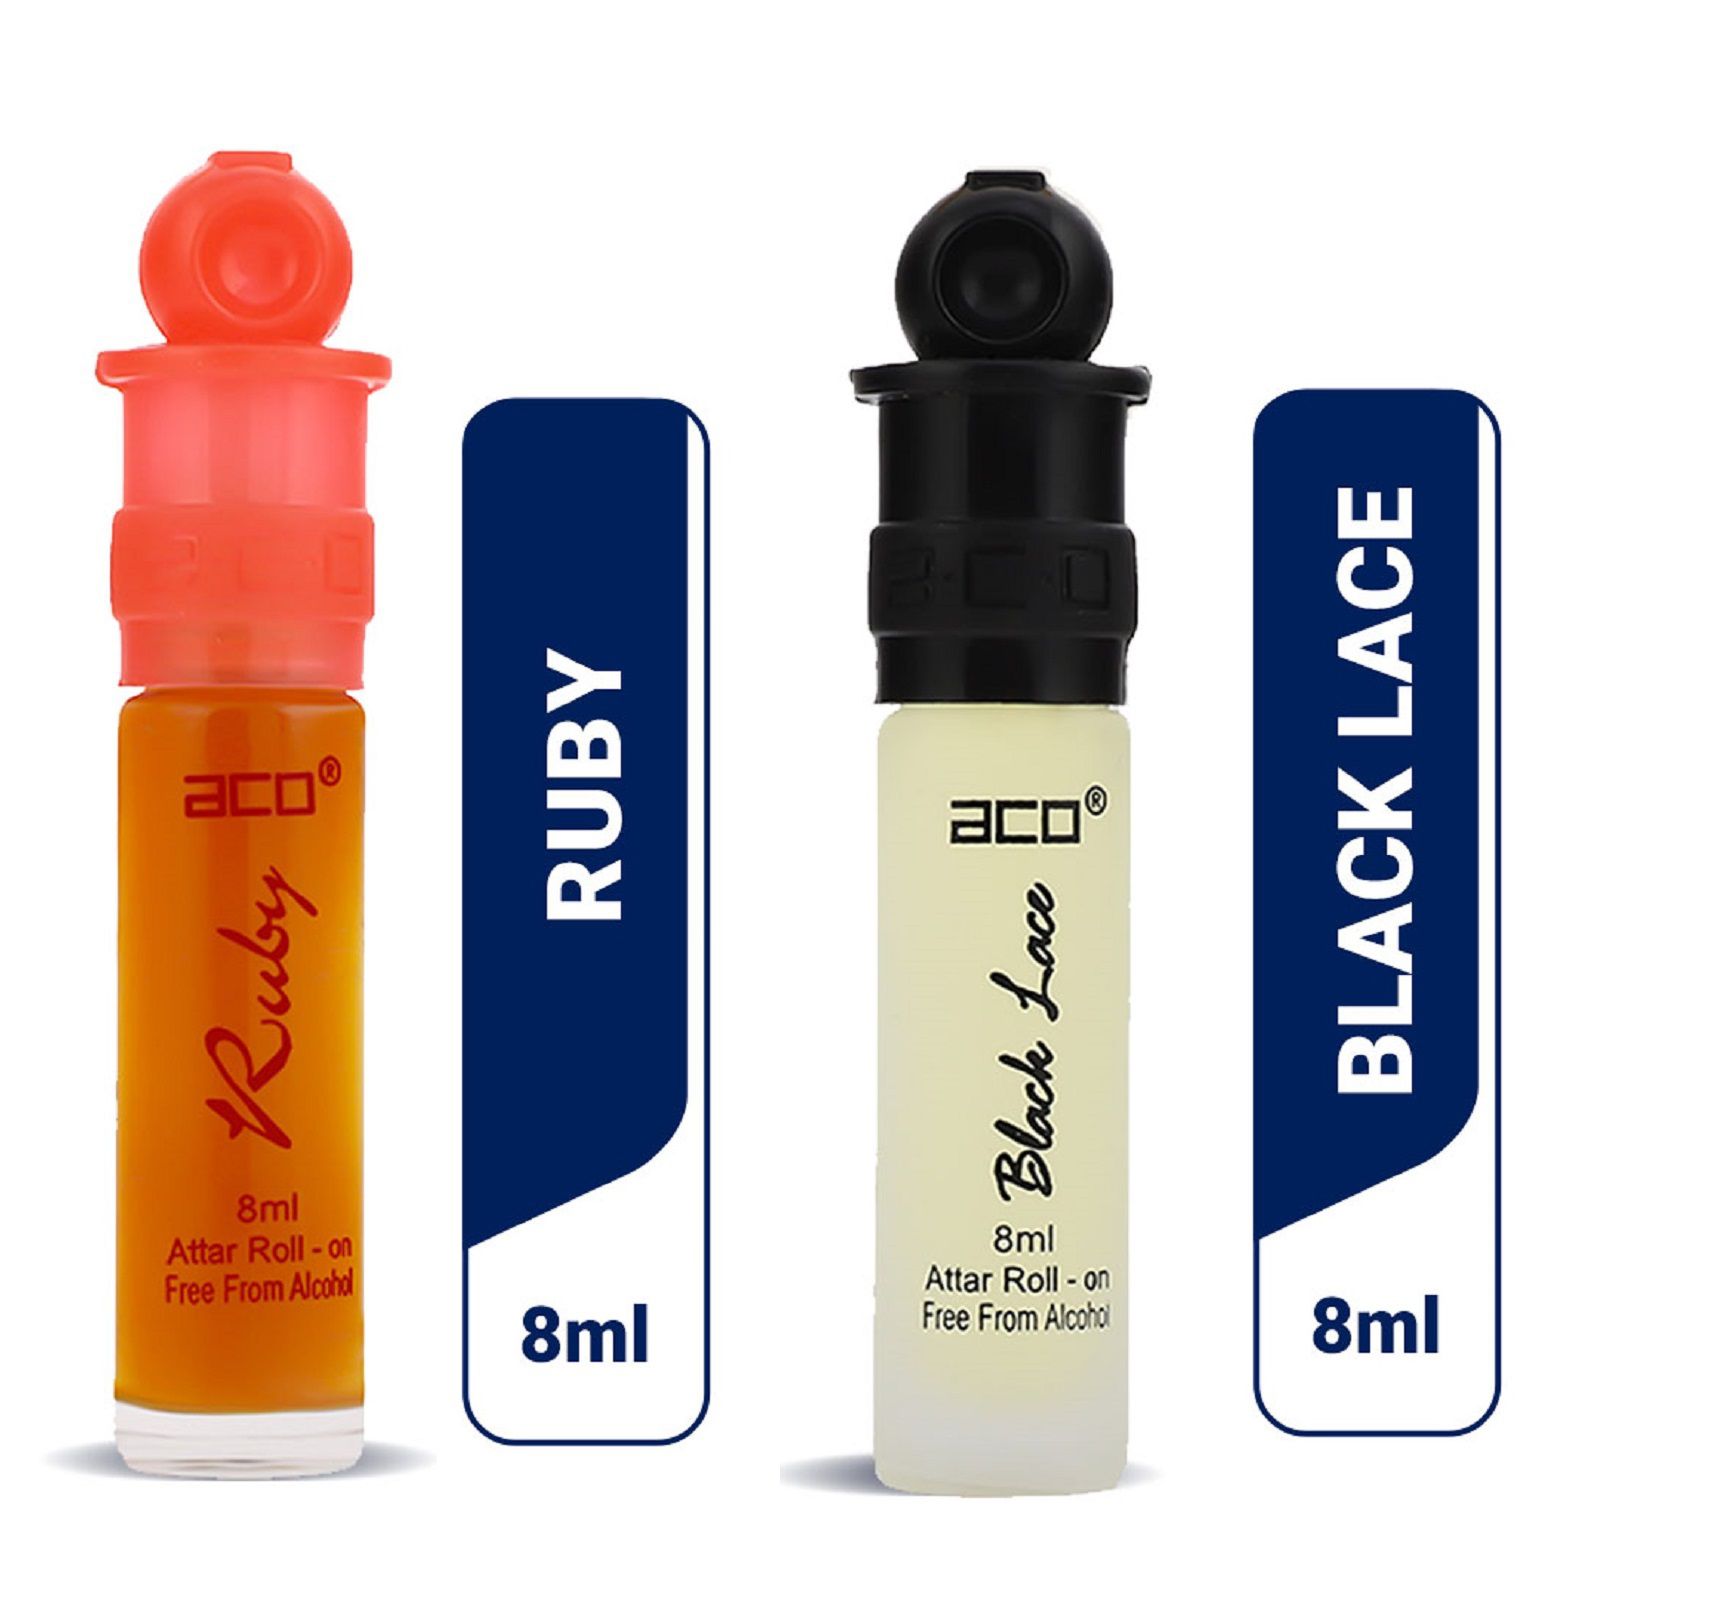     			aco perfumes Ruby & Black lace  in blue Concentrated  Attar Roll On 8ml COMBO SET